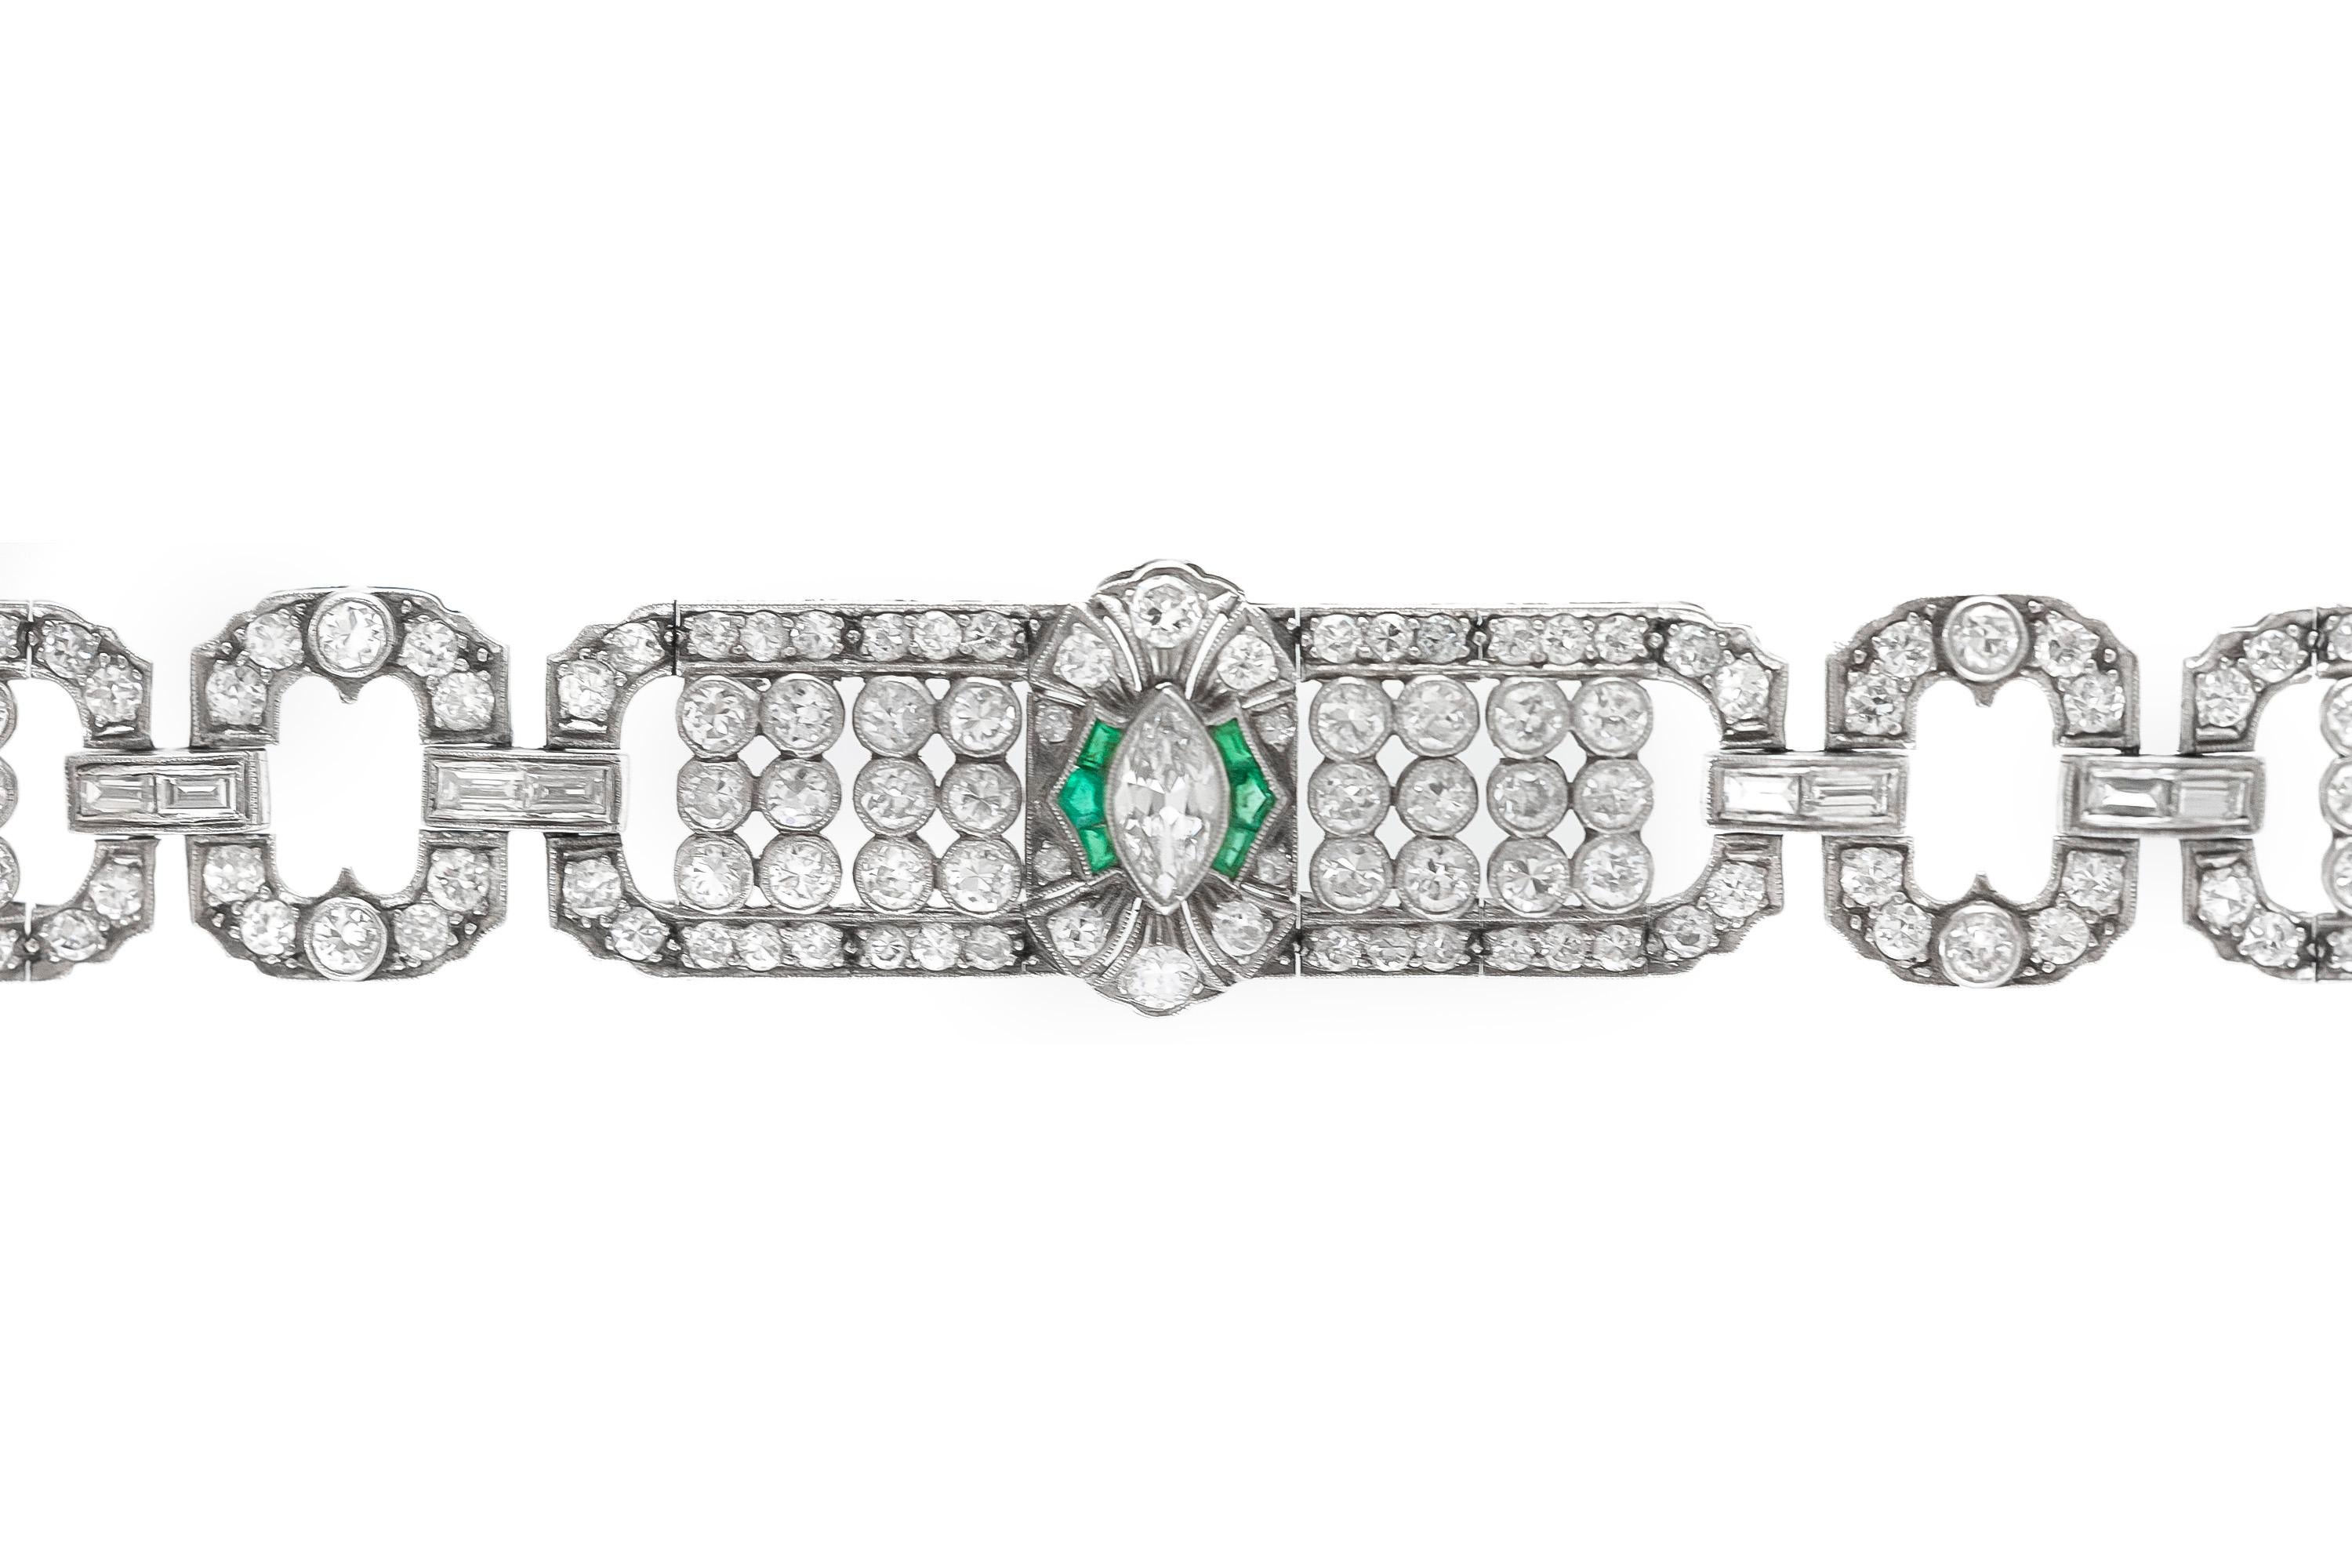 The beautiful bracelet is finly crafted in platinum with emerald and diamonds weighing approximately total of 15.00 carat.
beautiful and feminine .
Circa 1920's